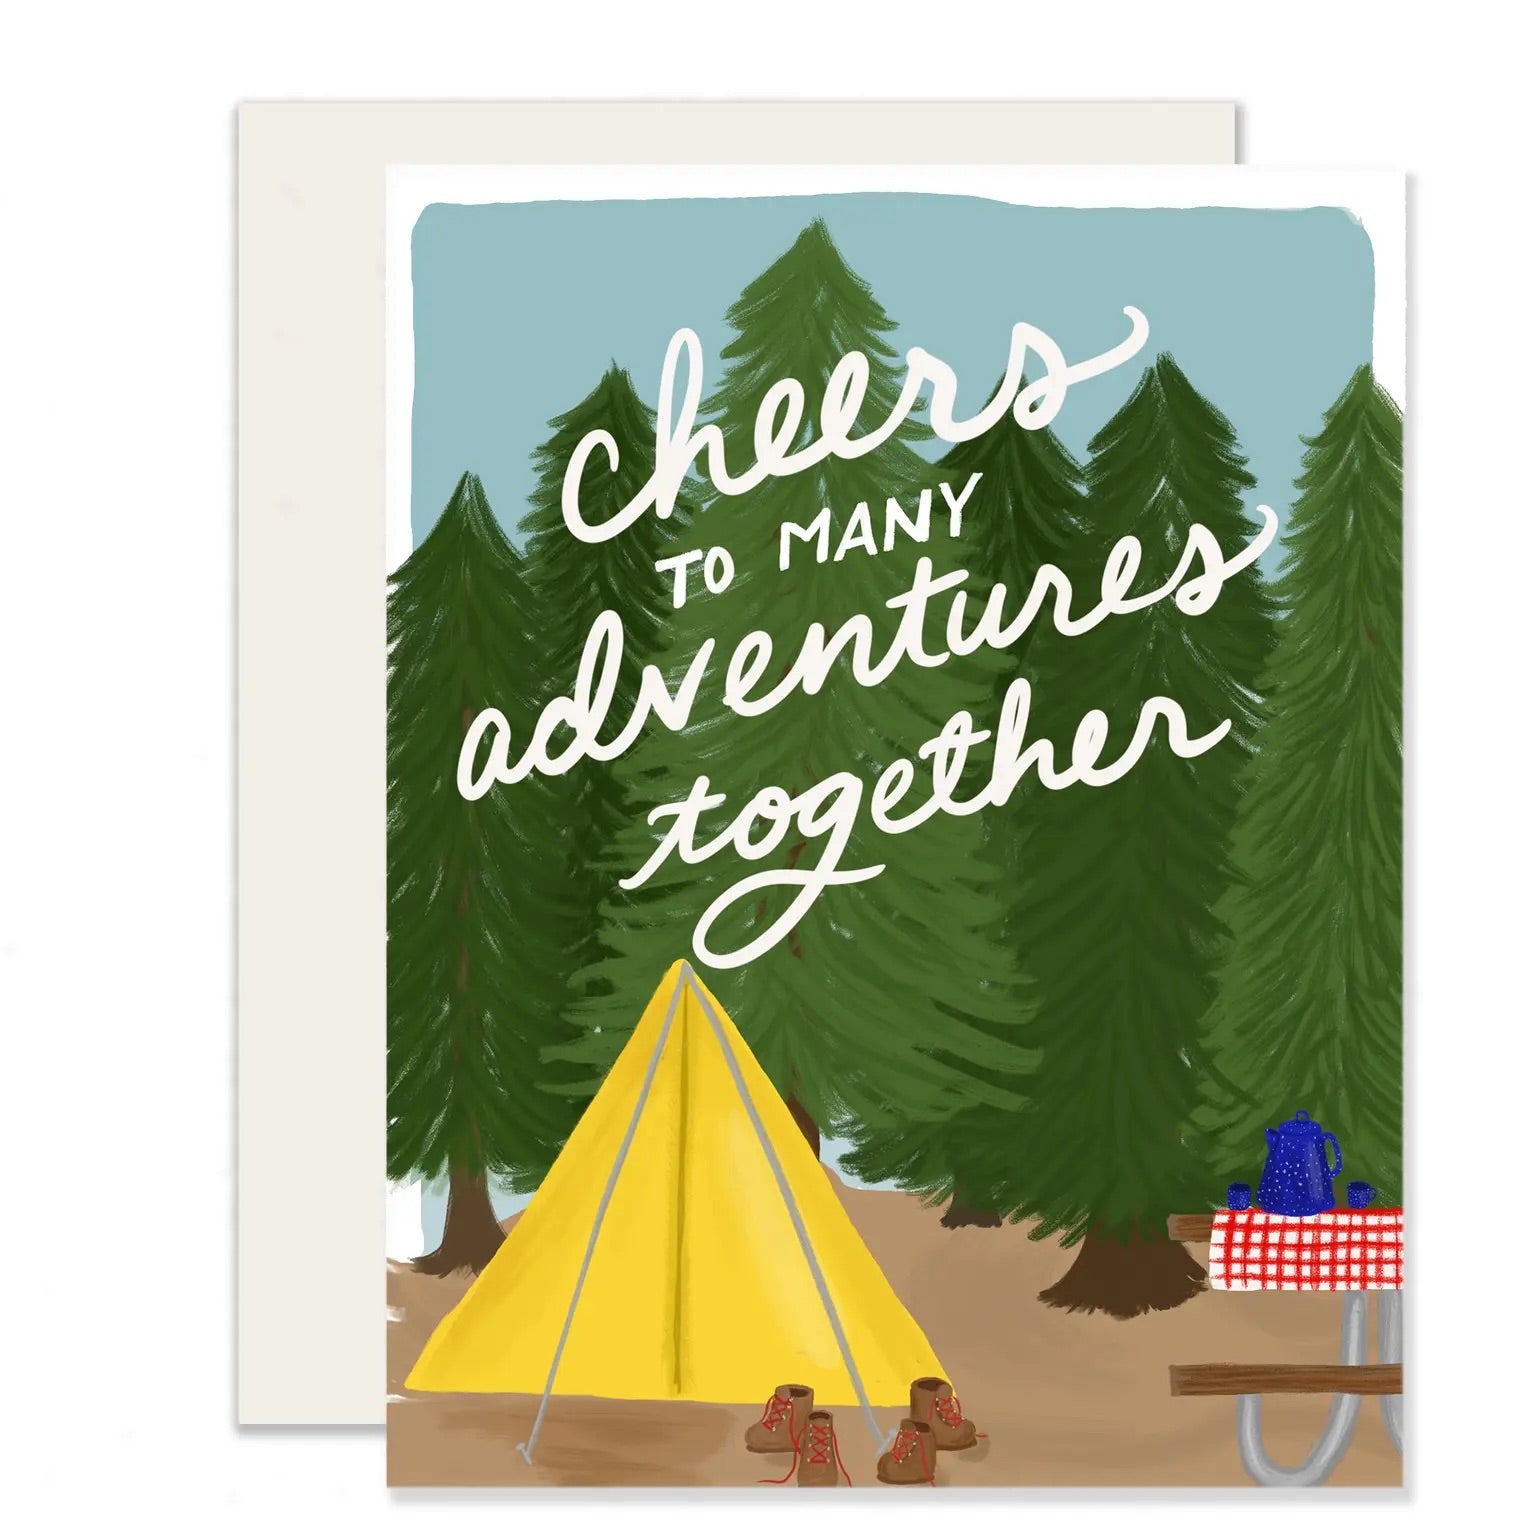 Tent with trees behind it. Cheers to many adventures together in white text